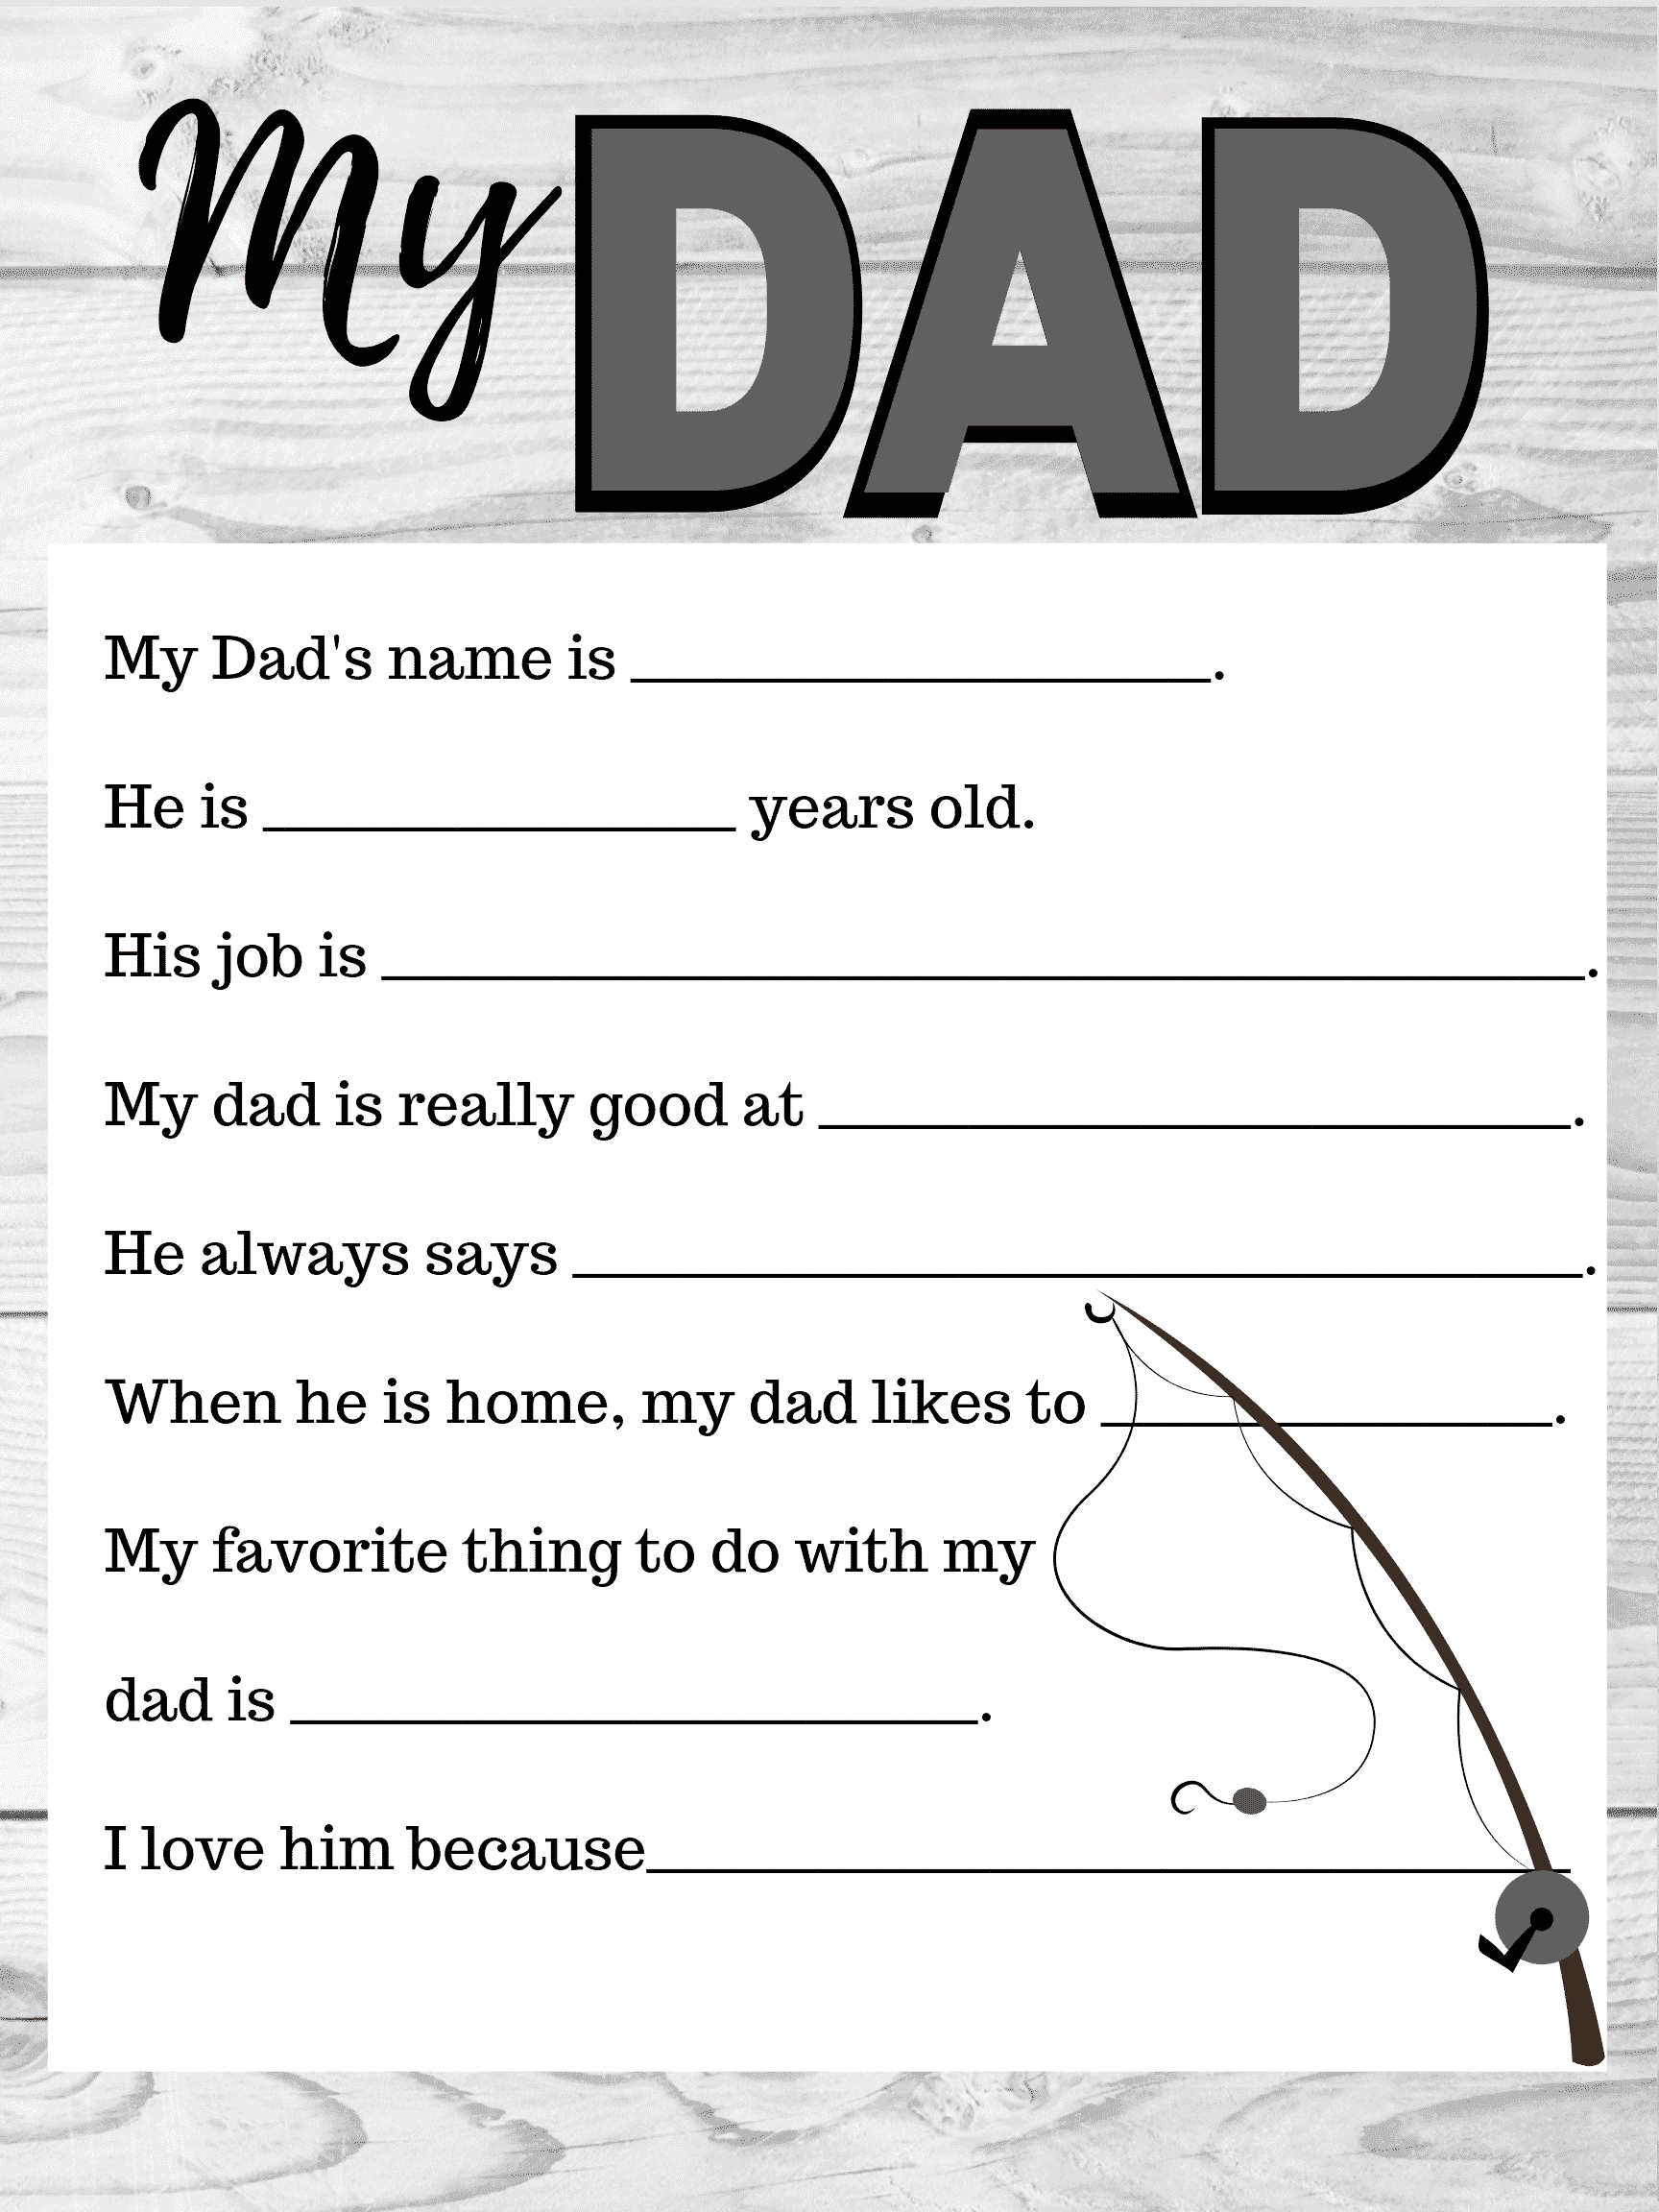 about-my-dad-free-fathers-day-printable-brooklyn-berry-designs